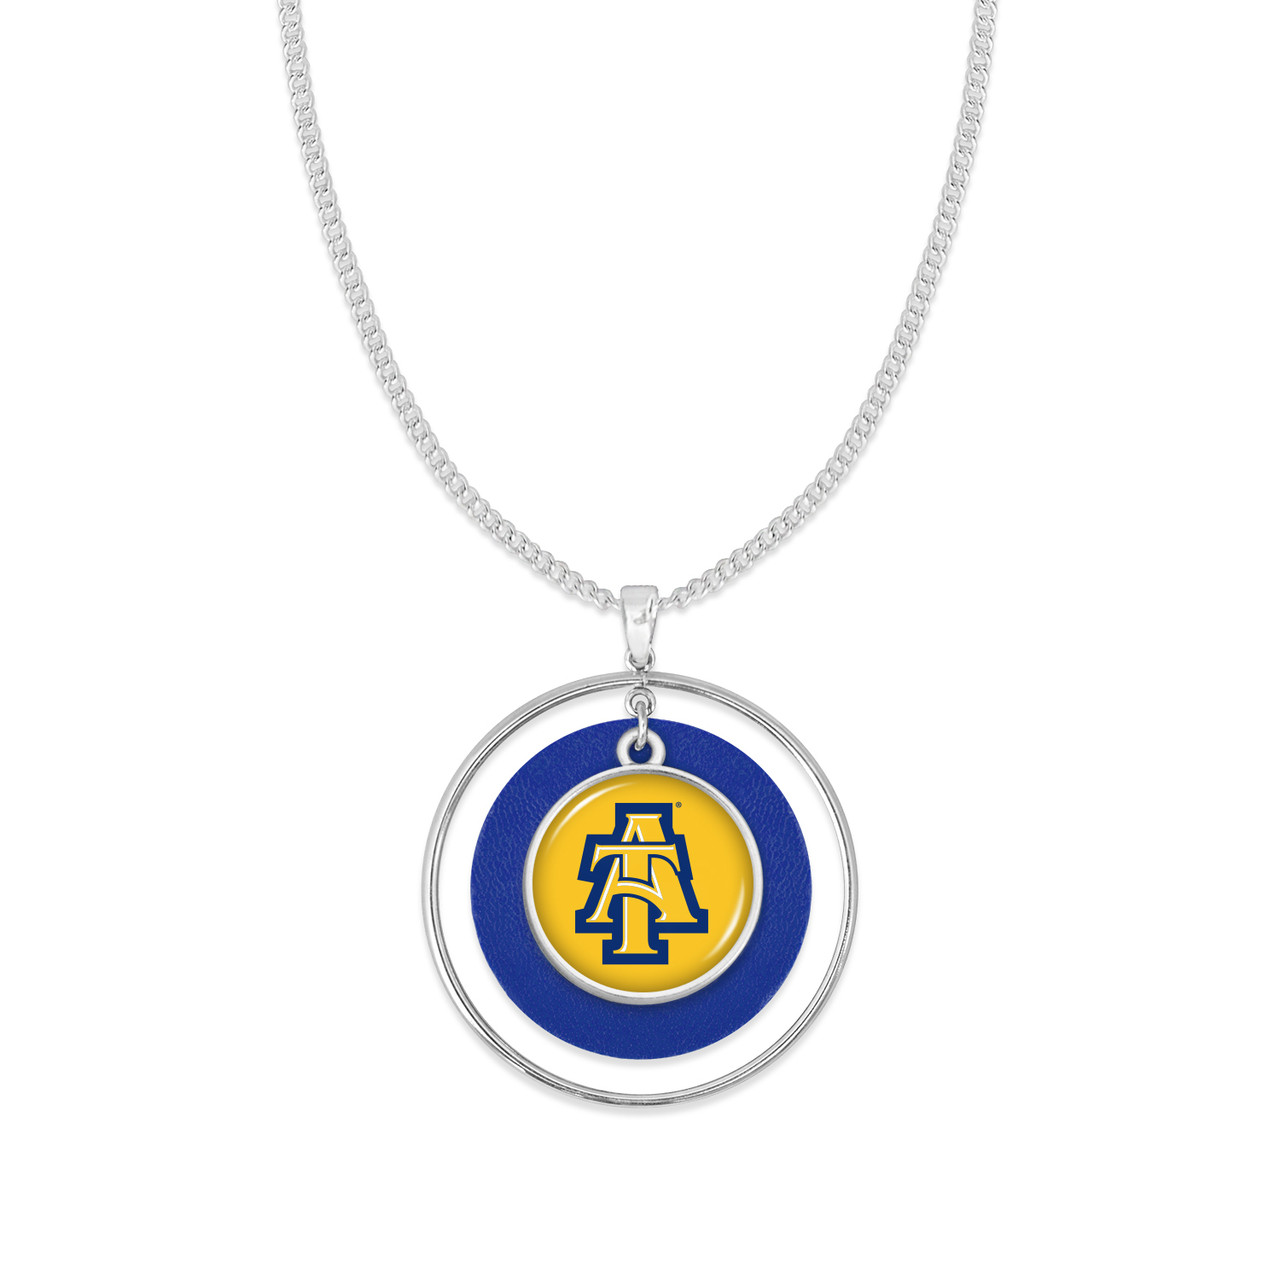 North Carolina A&T Aggies Necklace- Lindy